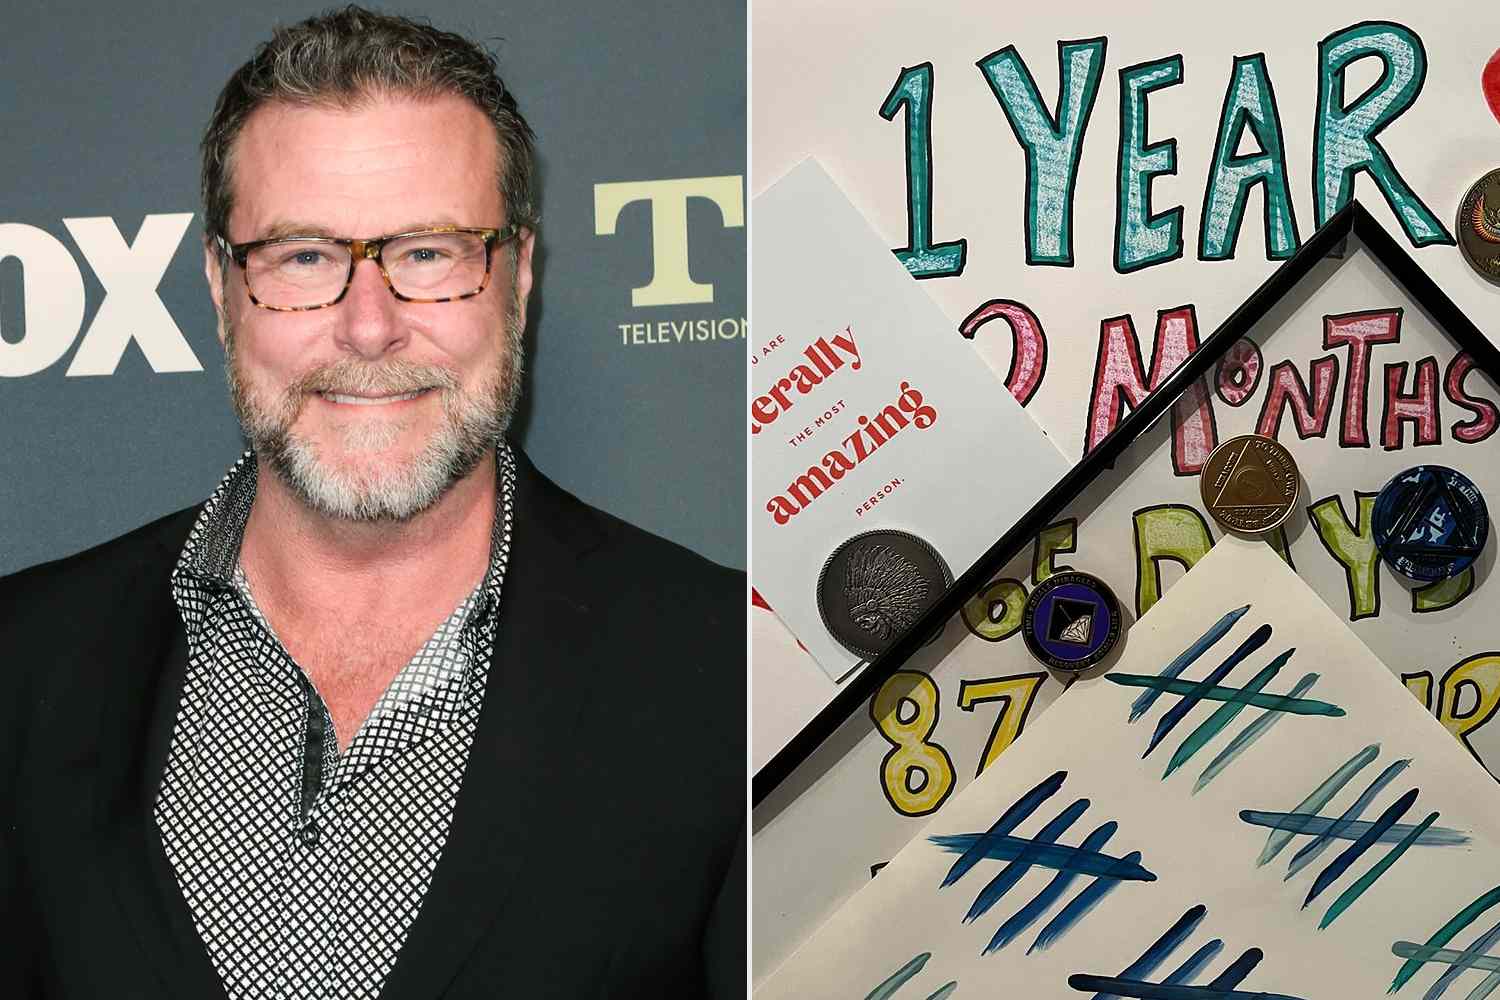 Dean McDermott Celebrates 1 Year of Sobriety: 'A Beautiful Life Awaits'